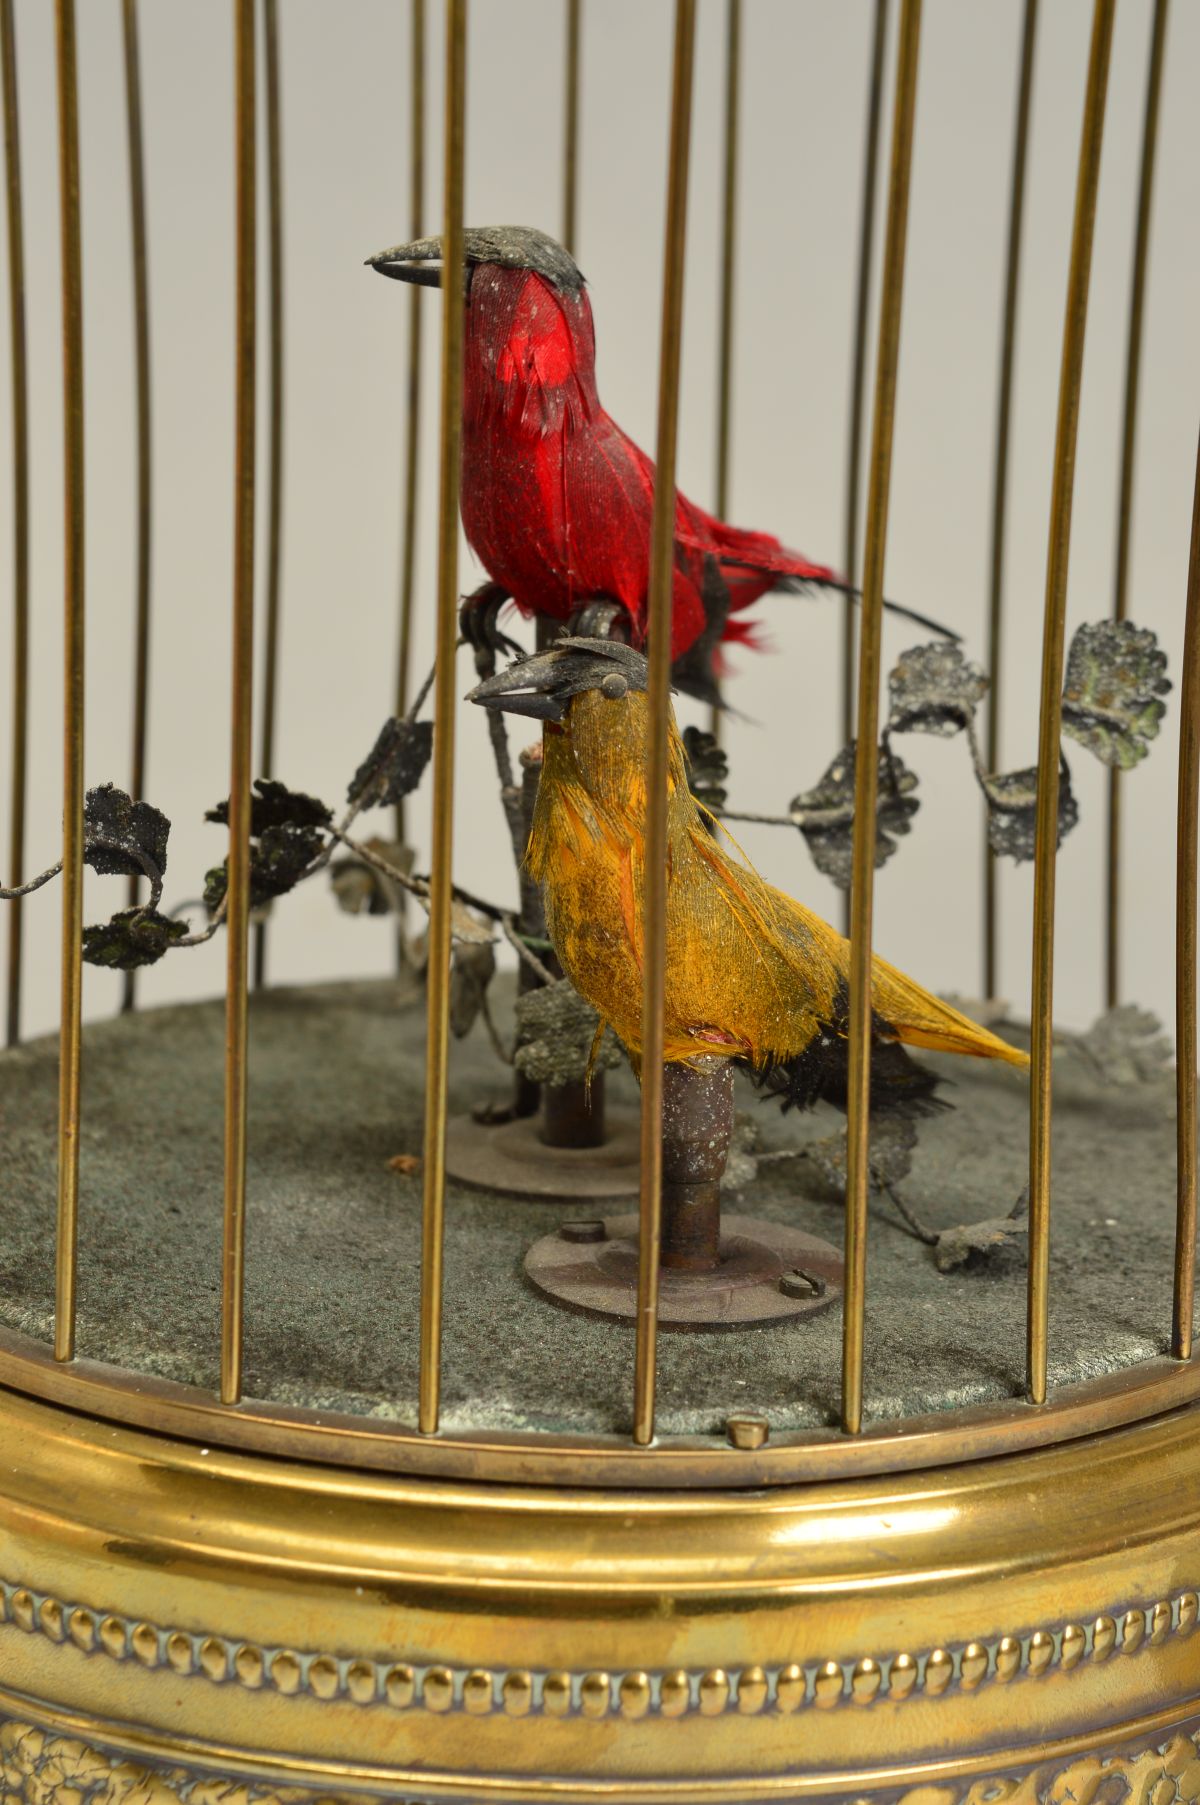 AN EARLY 20TH CENTURY CLOCKWORK AUTOMATON OF TWO BIRDS IN A BRASS CAGE, both birds sing and move - Image 5 of 6